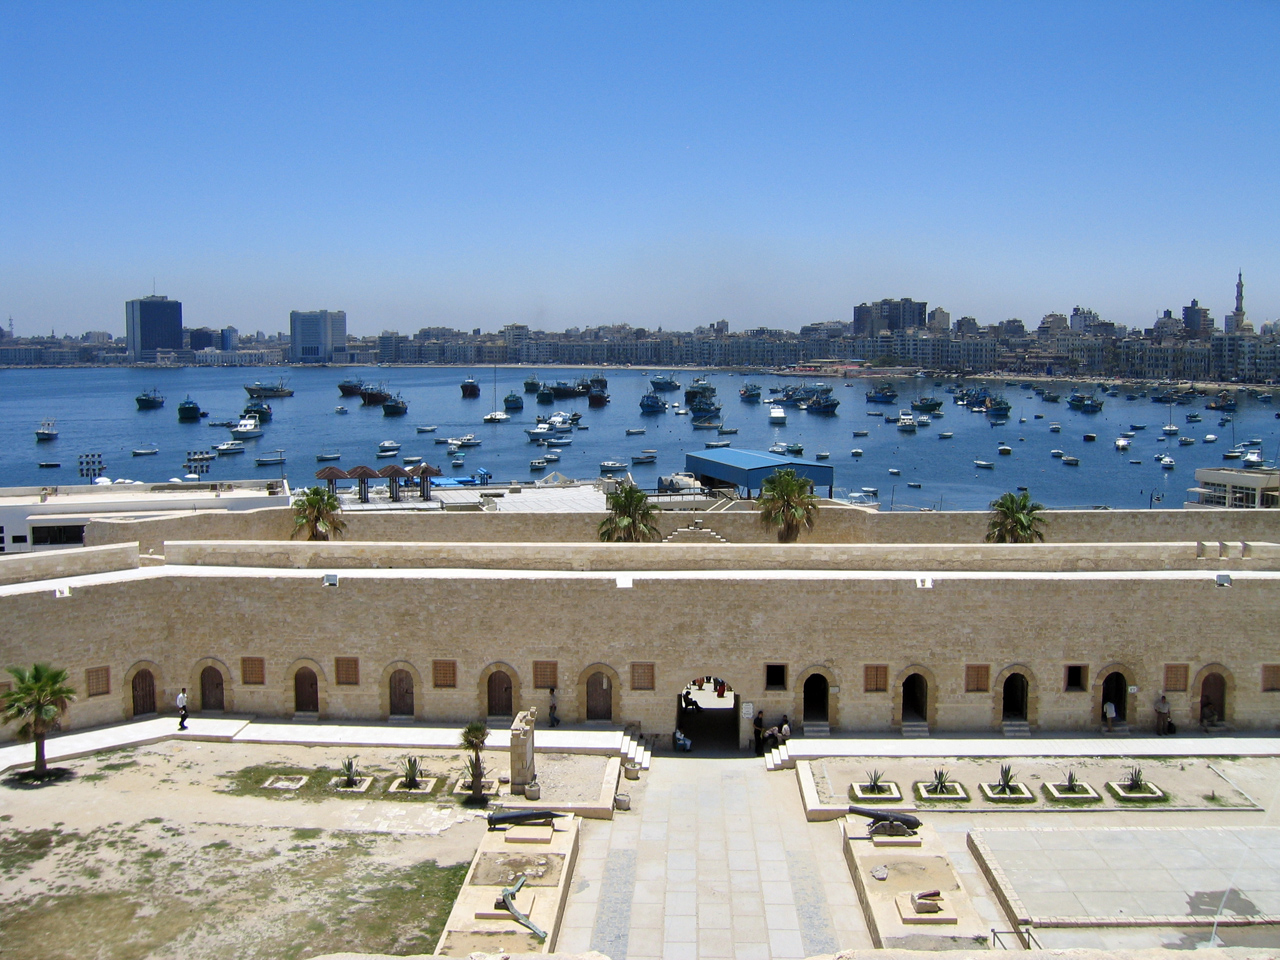 View of the harbour over the outer defensive walls of Fort Qaitbay. By Al Rahalah.